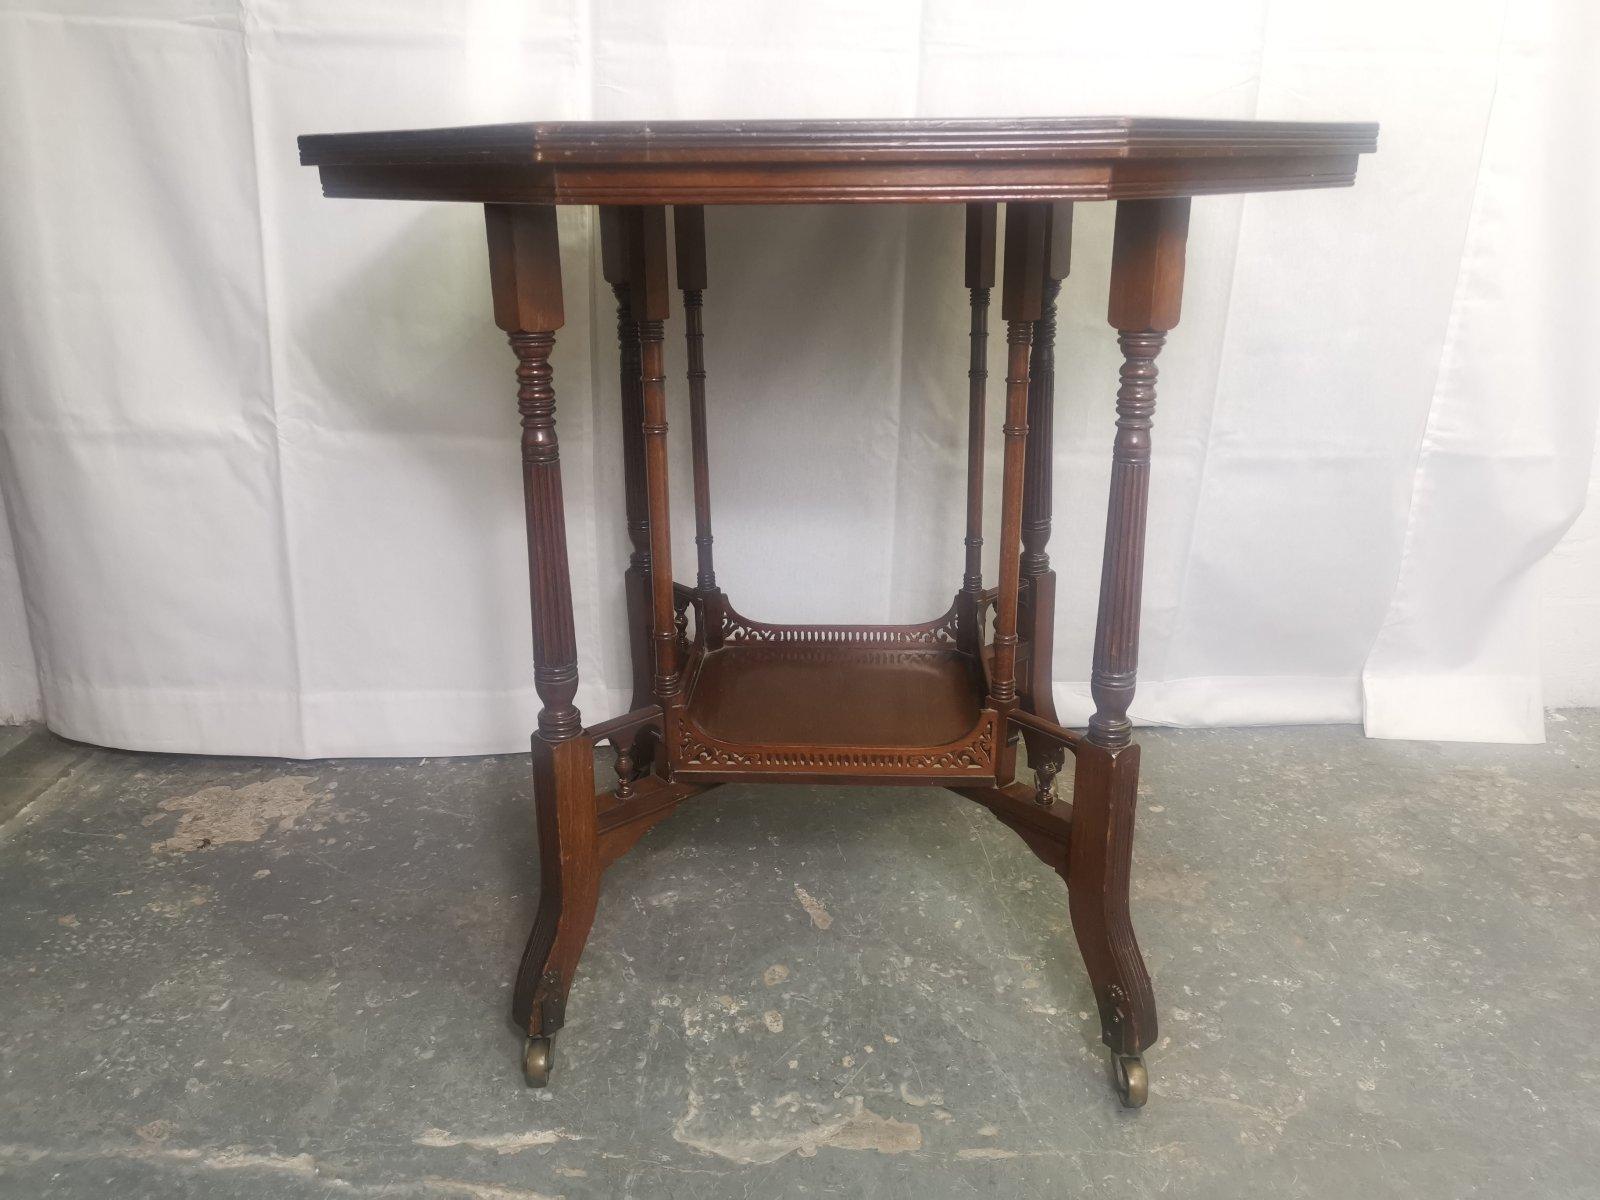 Gregory & Co, Regent St, London',
An aesthetic movement walnut centre or side table with impressed makers mark Numbered '4068'.
It has four internal finely turned supports flanked by four turned legs united by a lower shelf with pierced gallery